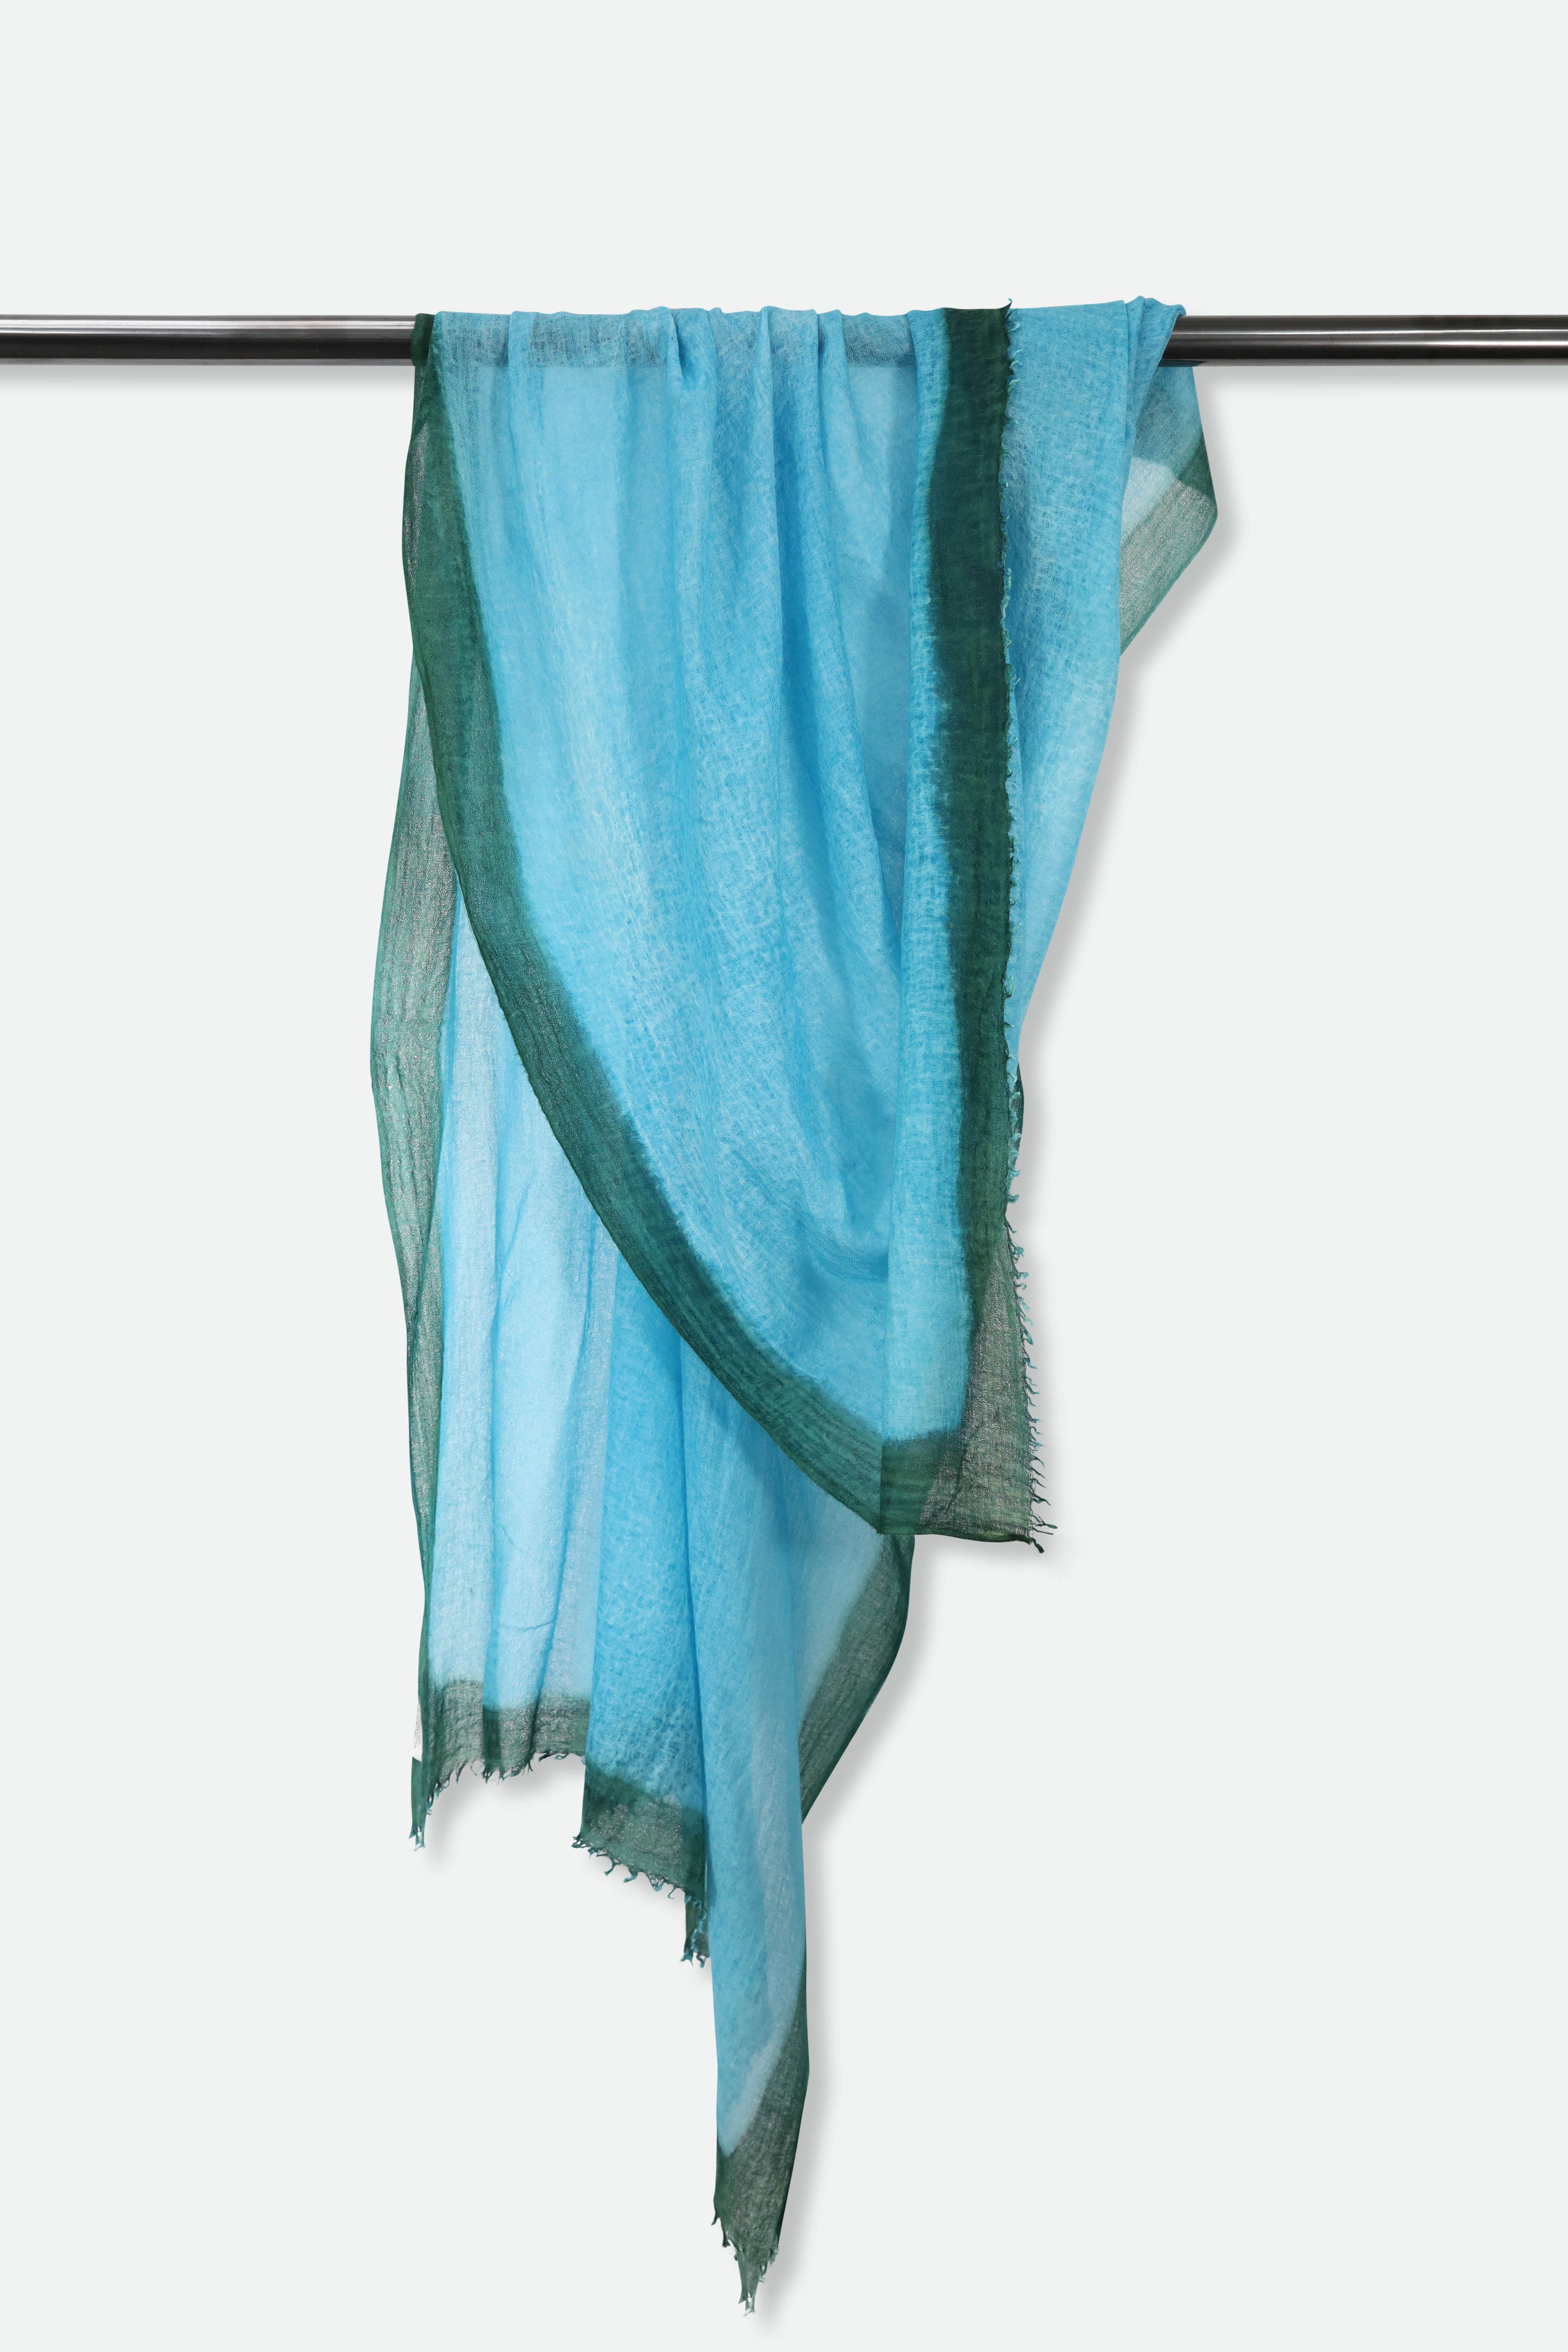 FERN BORDER SCARF IN HAND DYED CASHMERE - Jarbo